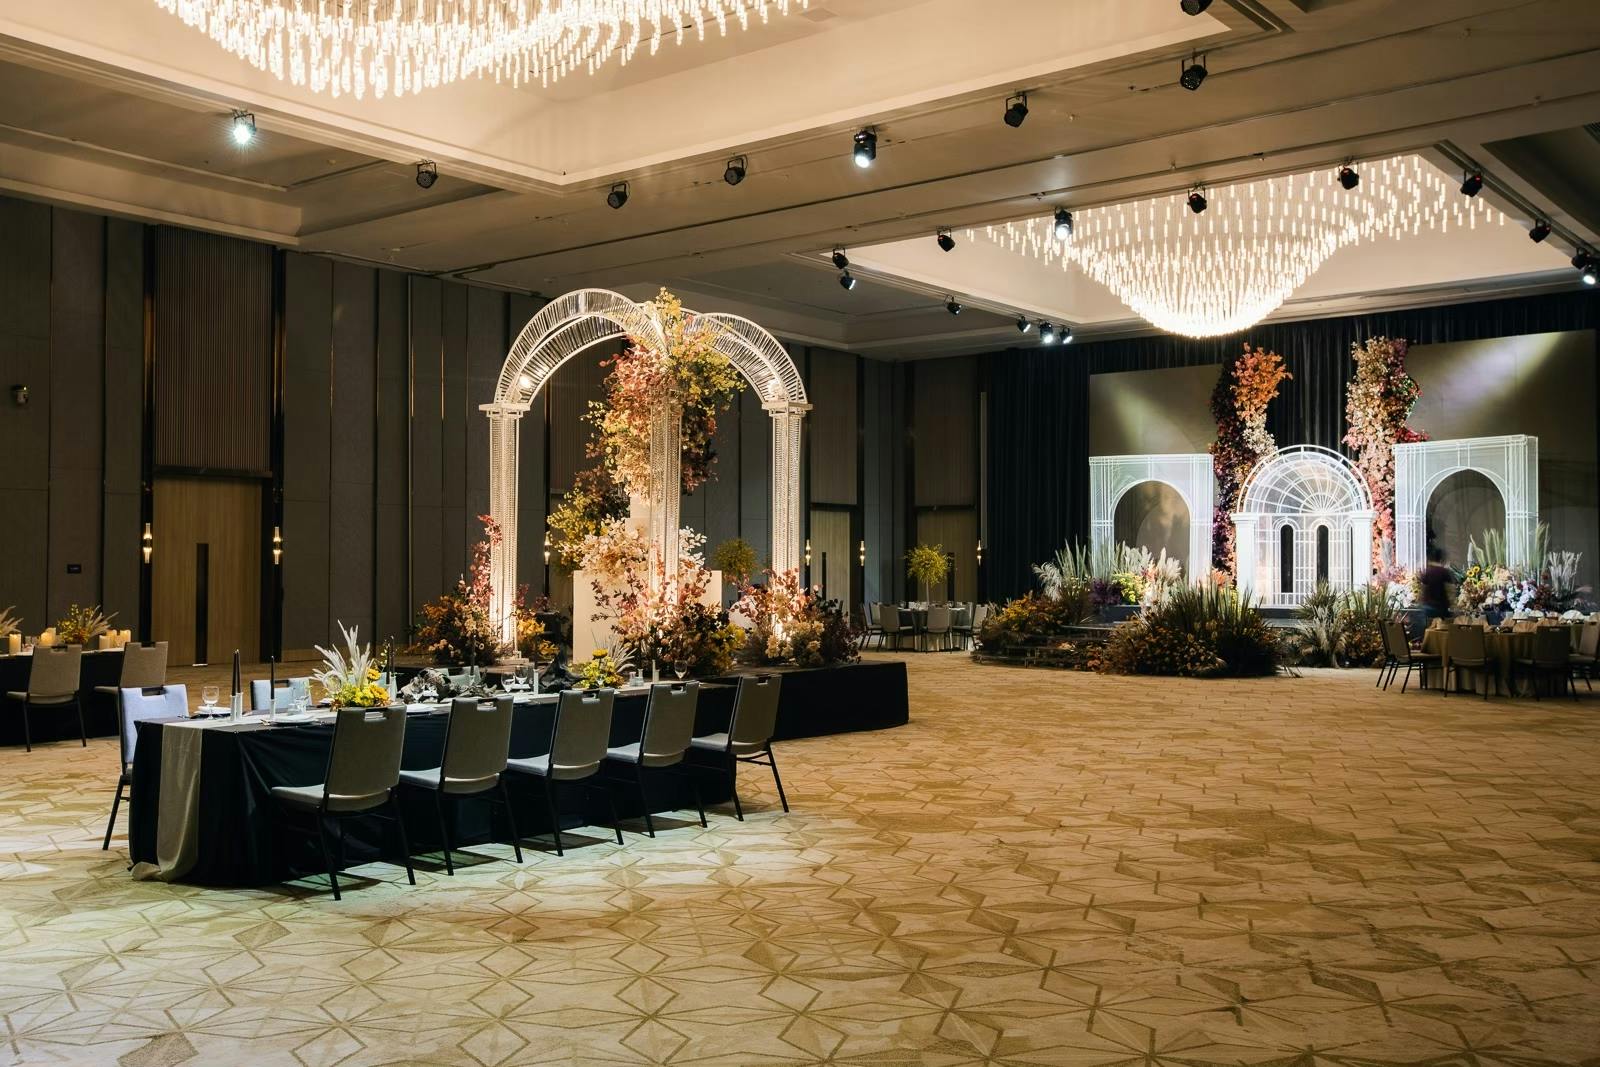 SAY ‘I DO’ TO THE INDIAN WEDDING OF YOUR DREAMS AT THE HIDDEN GEM - GRAND RICHMOND HOTEL